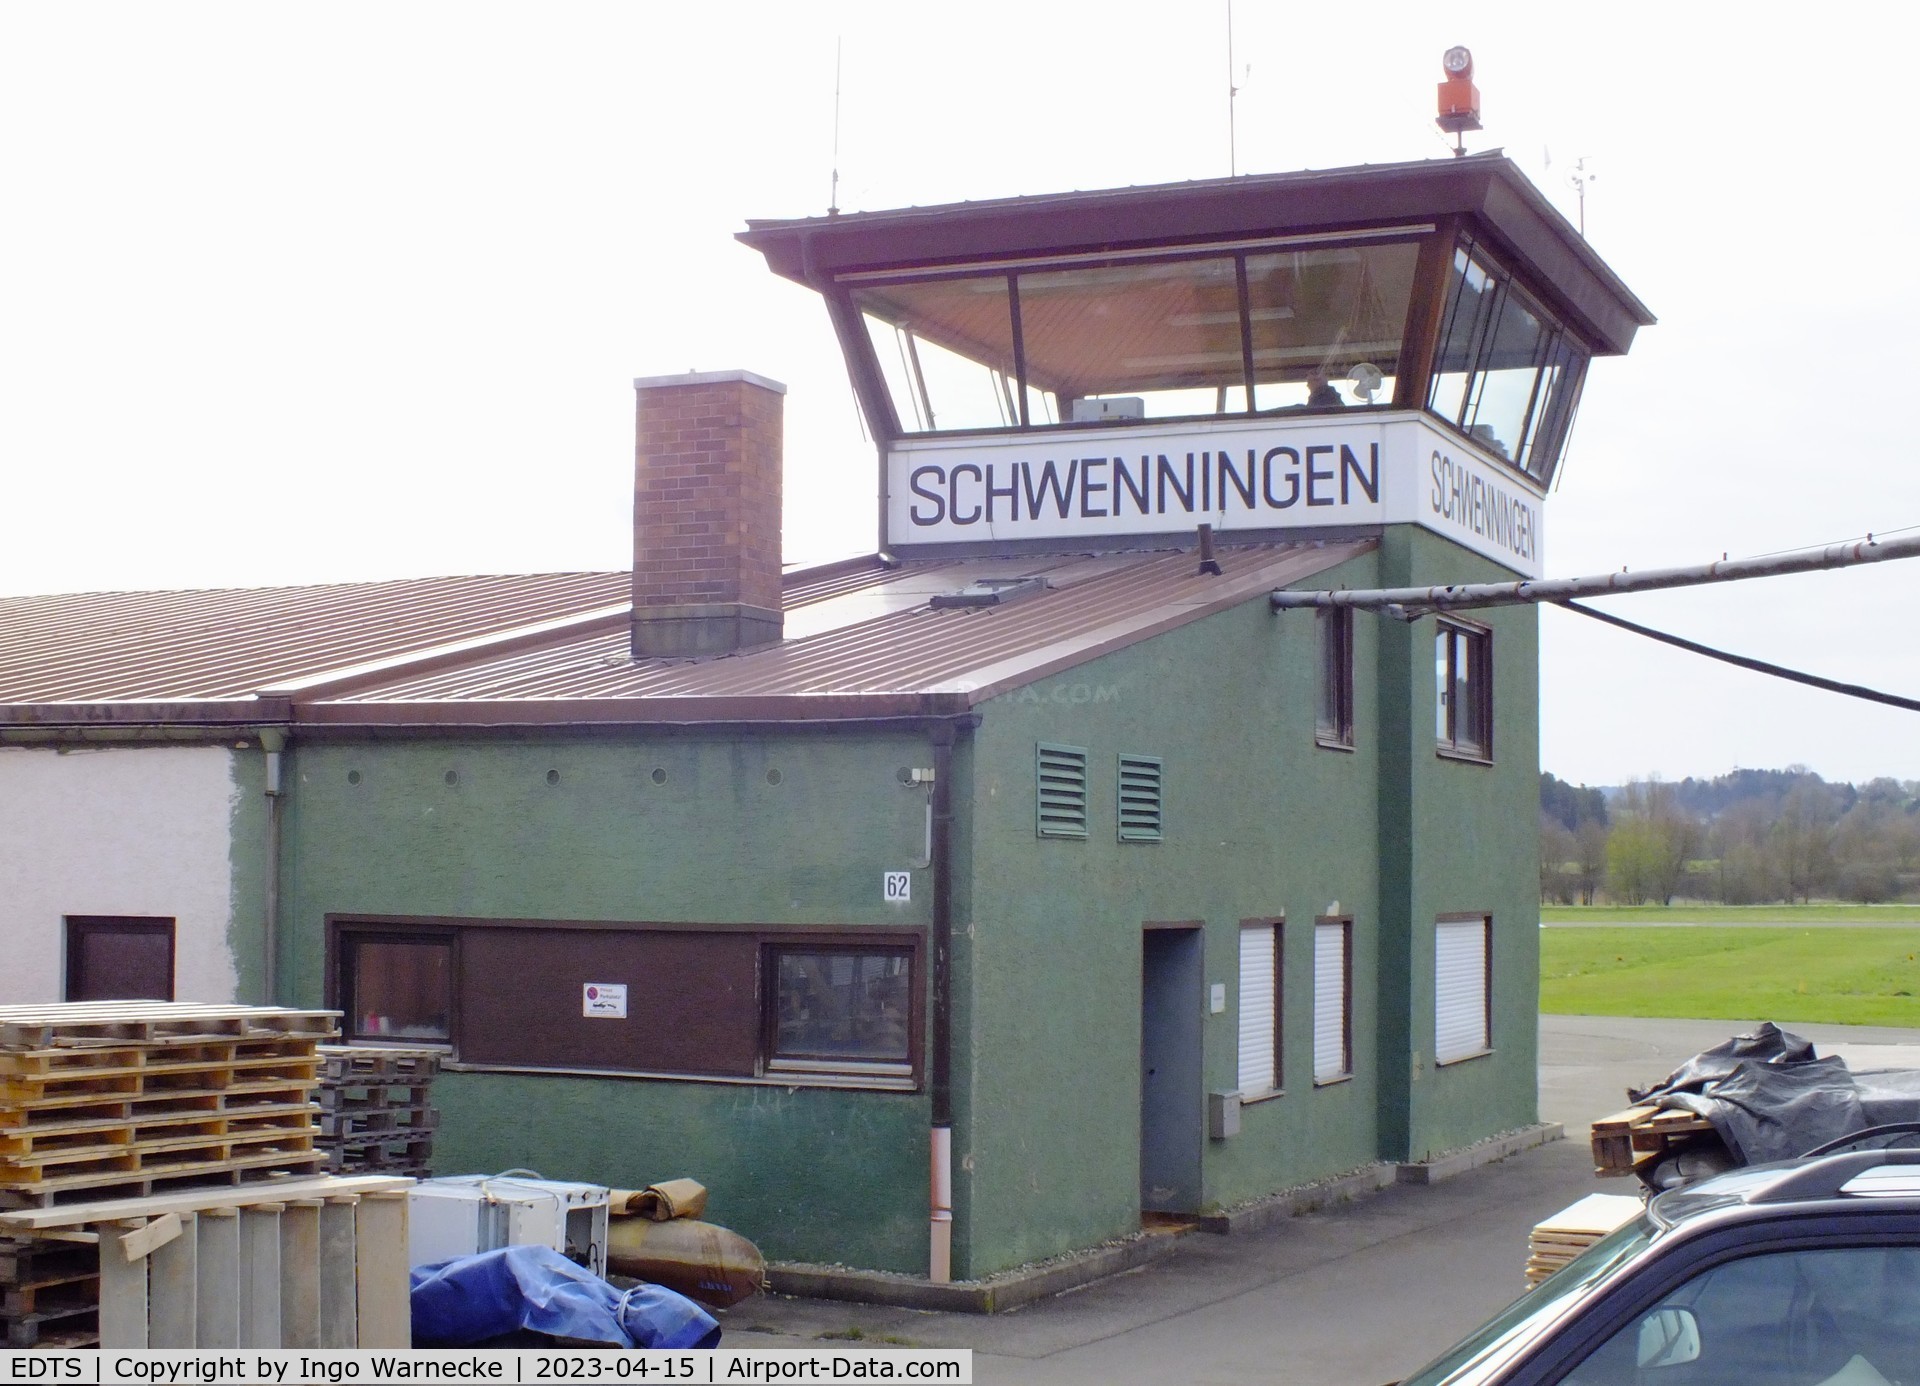 EDTS Airport - landside view of the tower at Schwenningen airfield